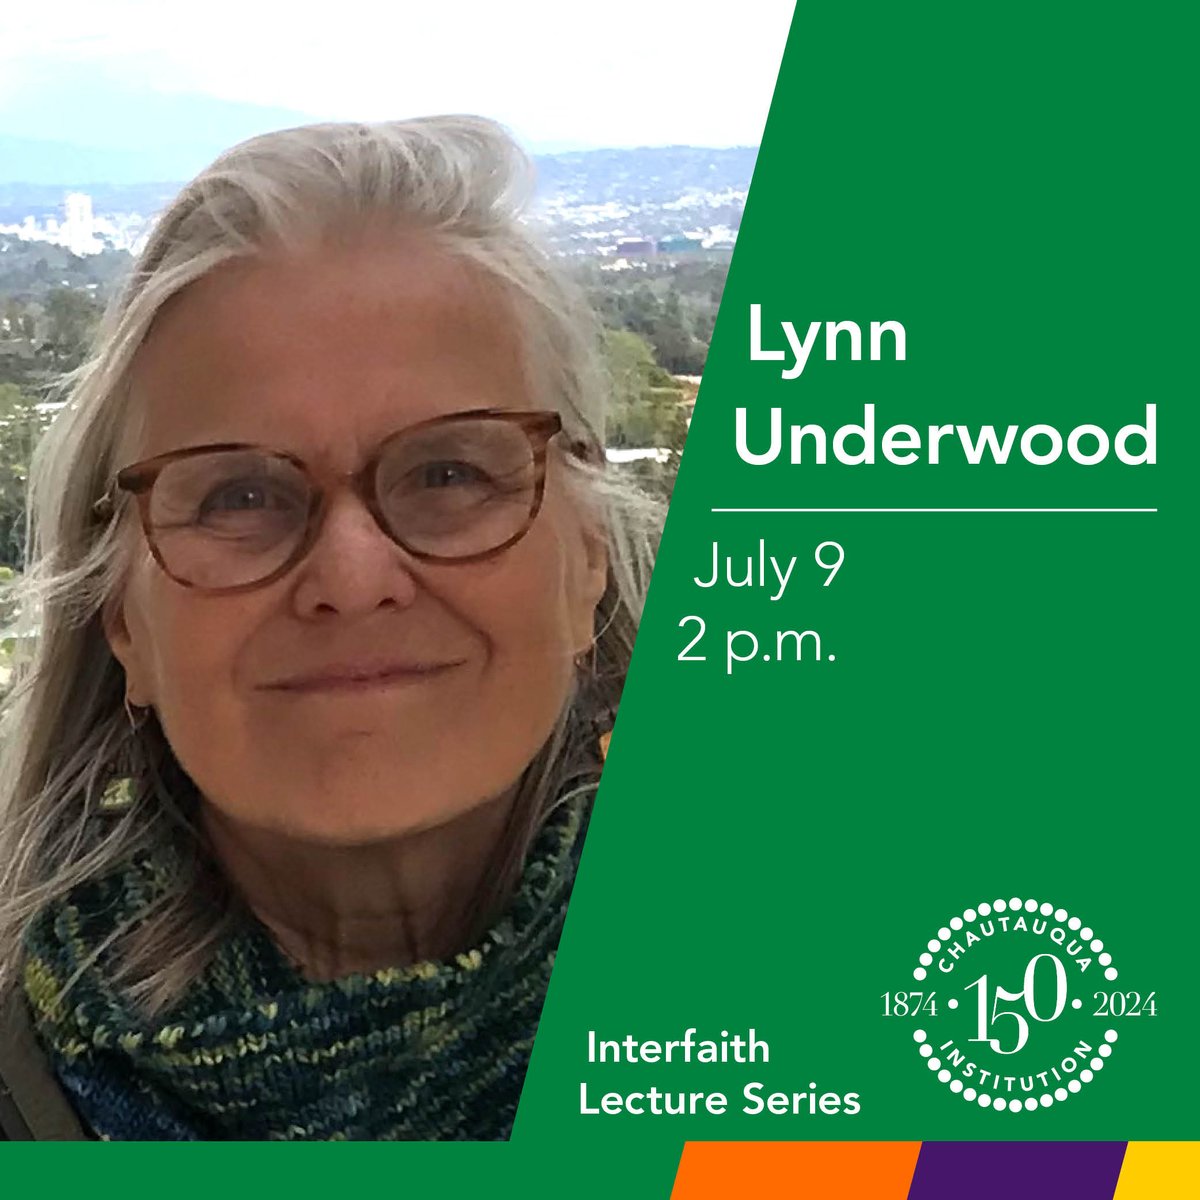 🚨#CHQ2024 ANNOUNCEMENT🚨 Senior Research Associate at the Inamori International Center for Ethics at Case Western Reserve University, Lynn Underwood joins an unforgettable lecture lineup for Chautauqua's 150th anniversary season! #CHQ2024 #chq150